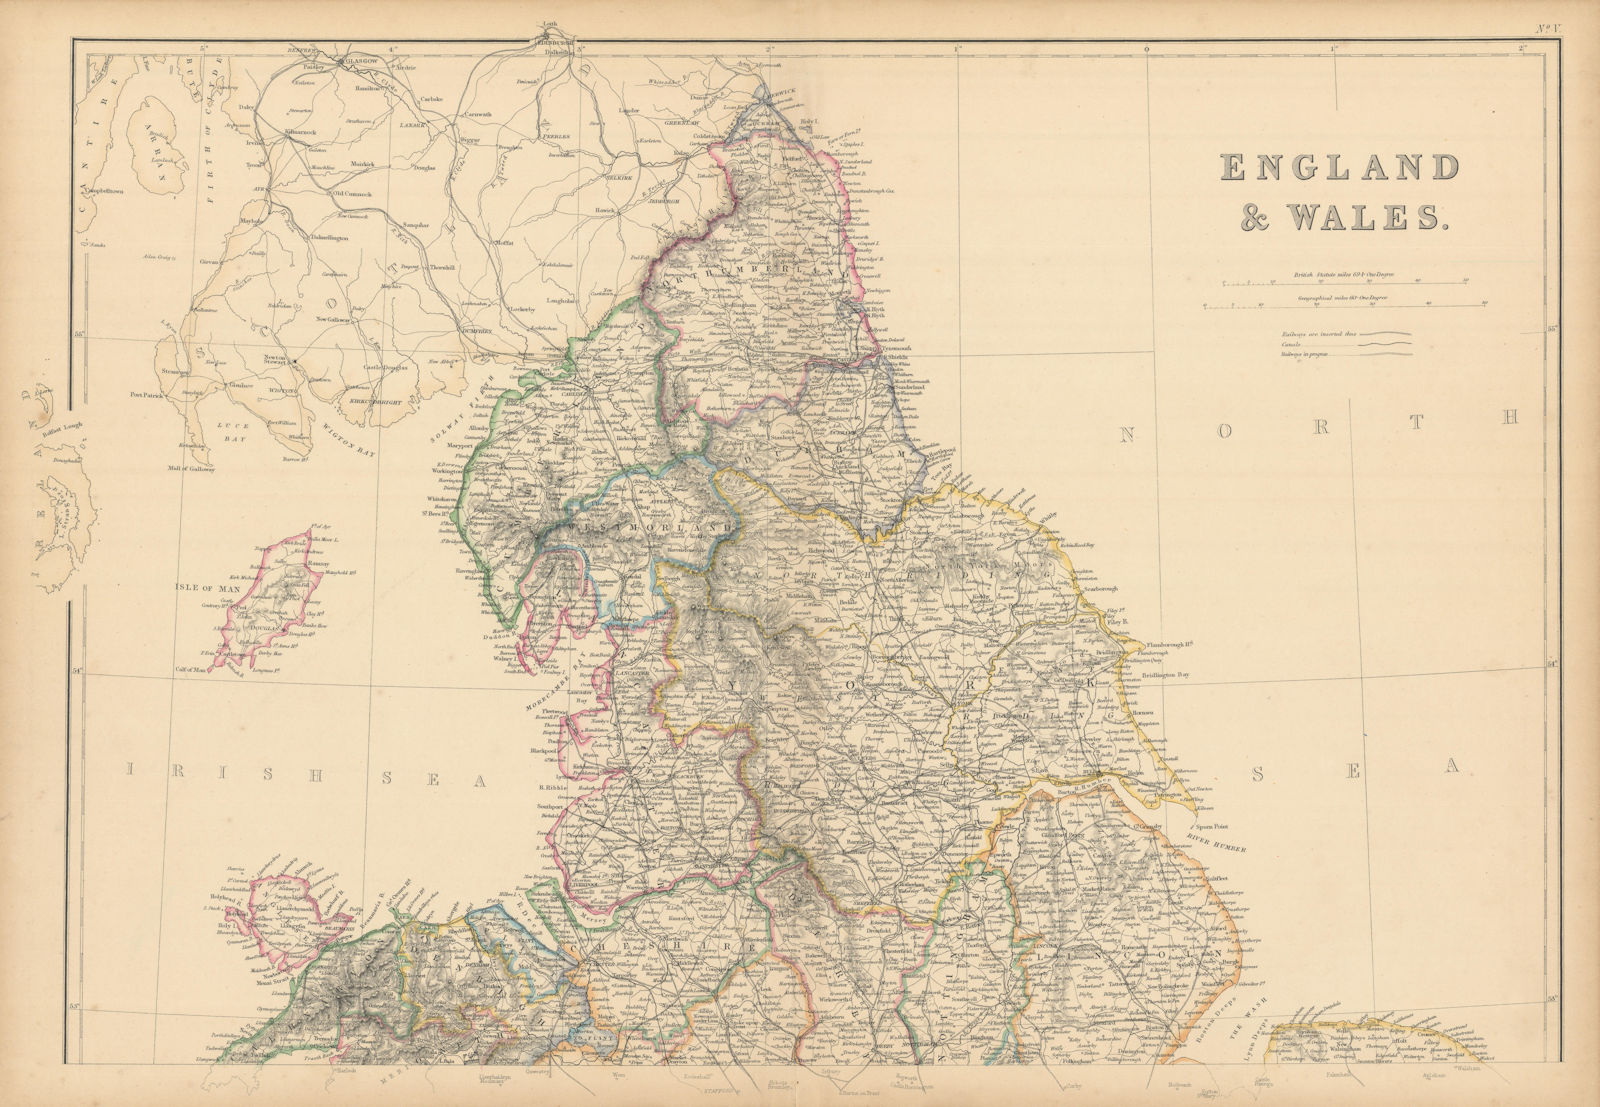 Associate Product England and Wales (North Part) by Edward Weller 1859 old antique map chart